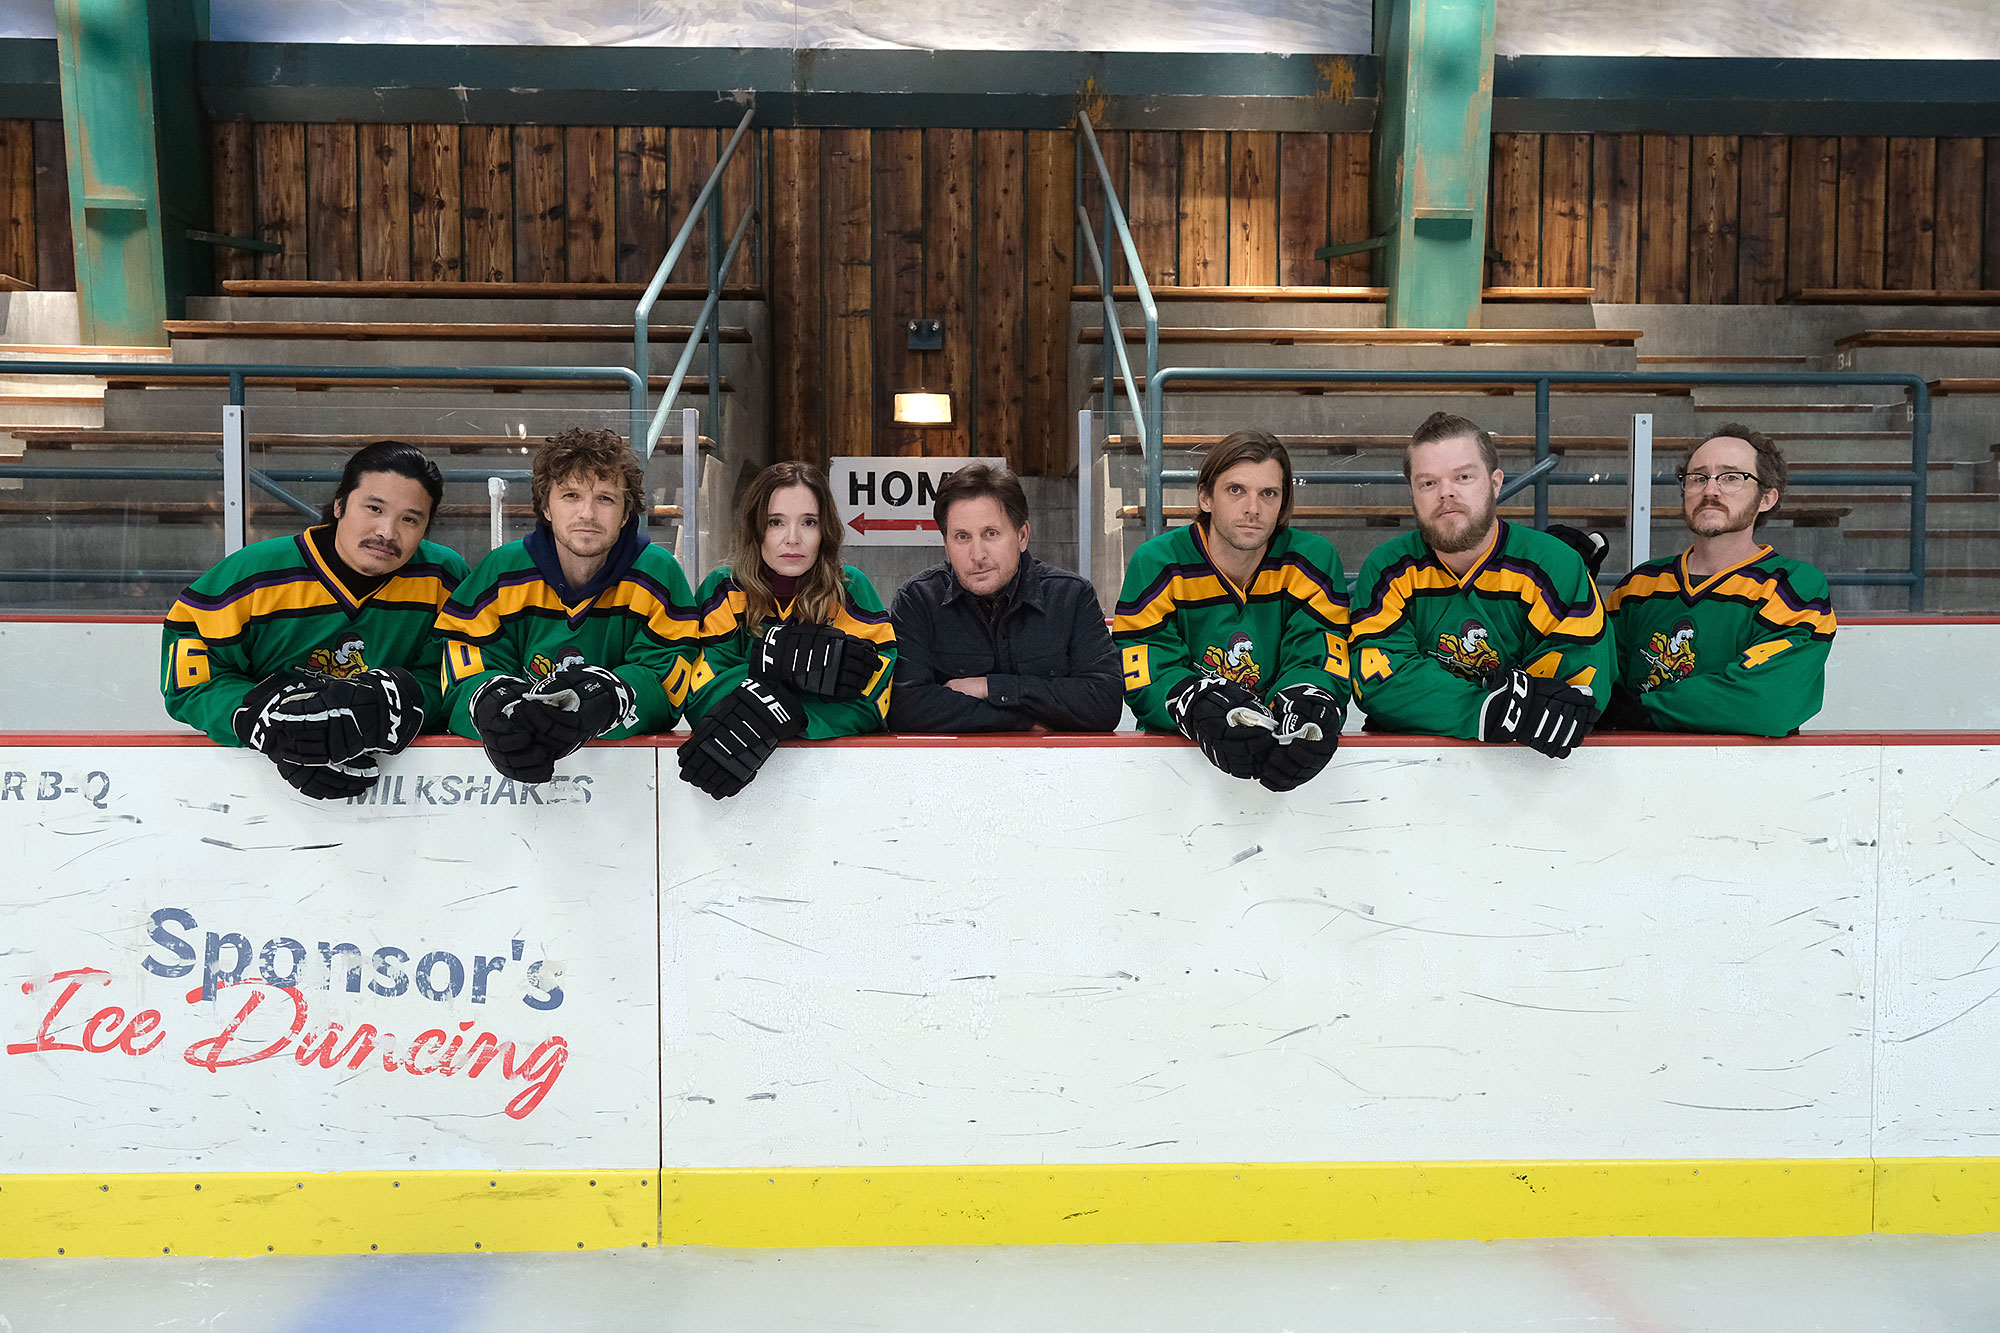 Will There Be a Season 2 of 'The Mighty Ducks: Game Changers'?